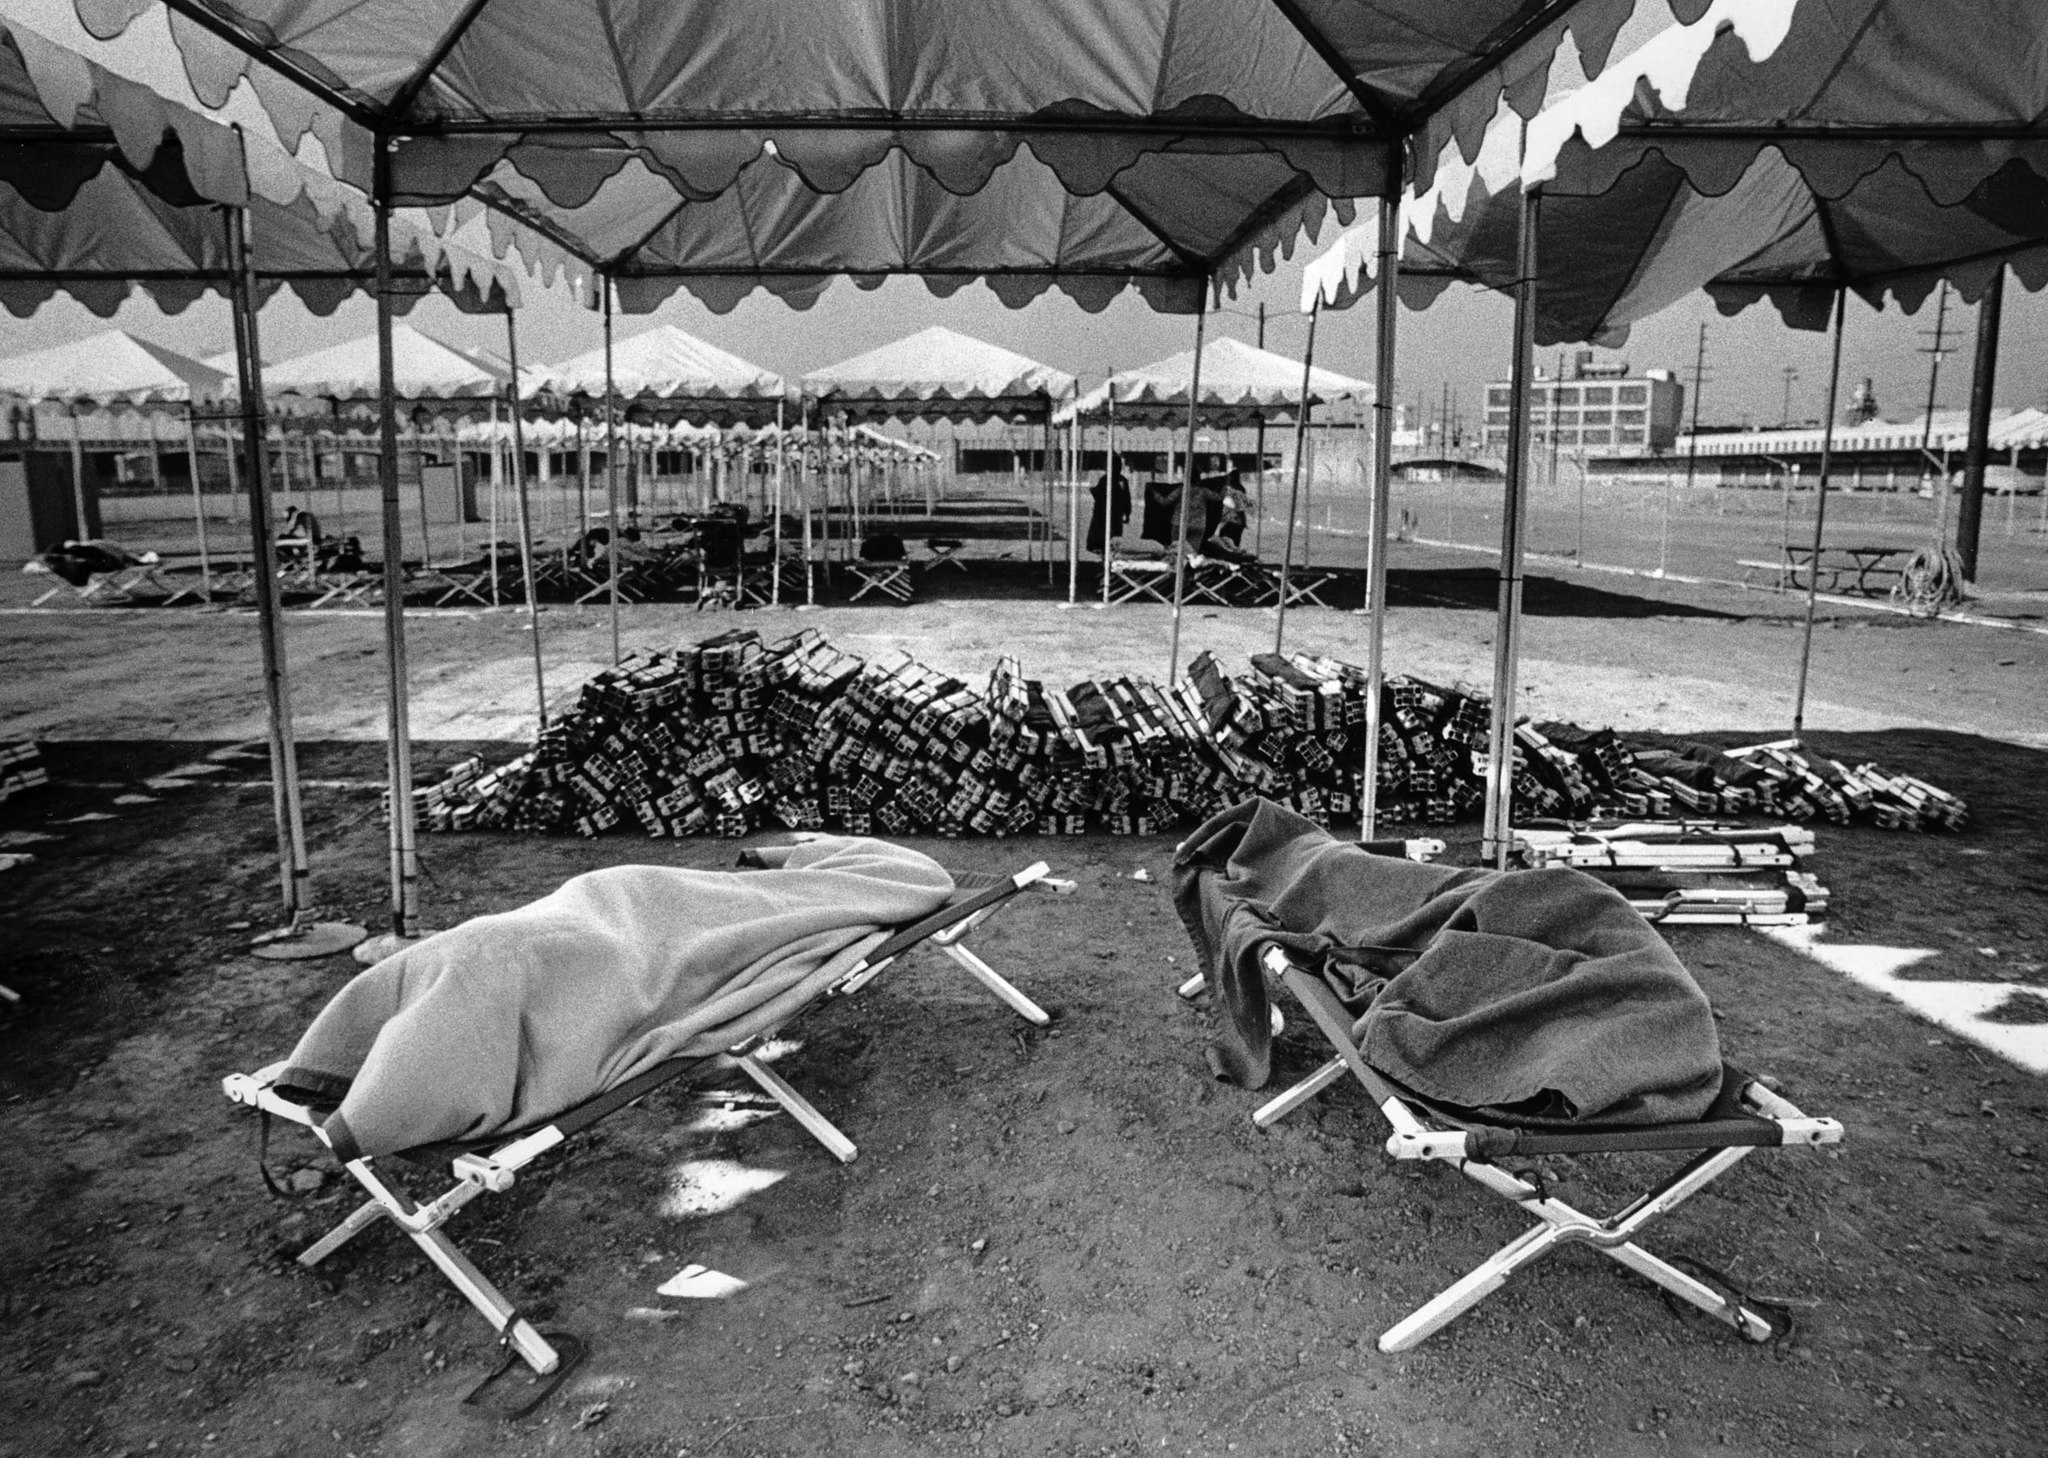 June 16, 1987: Two people sleep while a stack of cots go unused at the